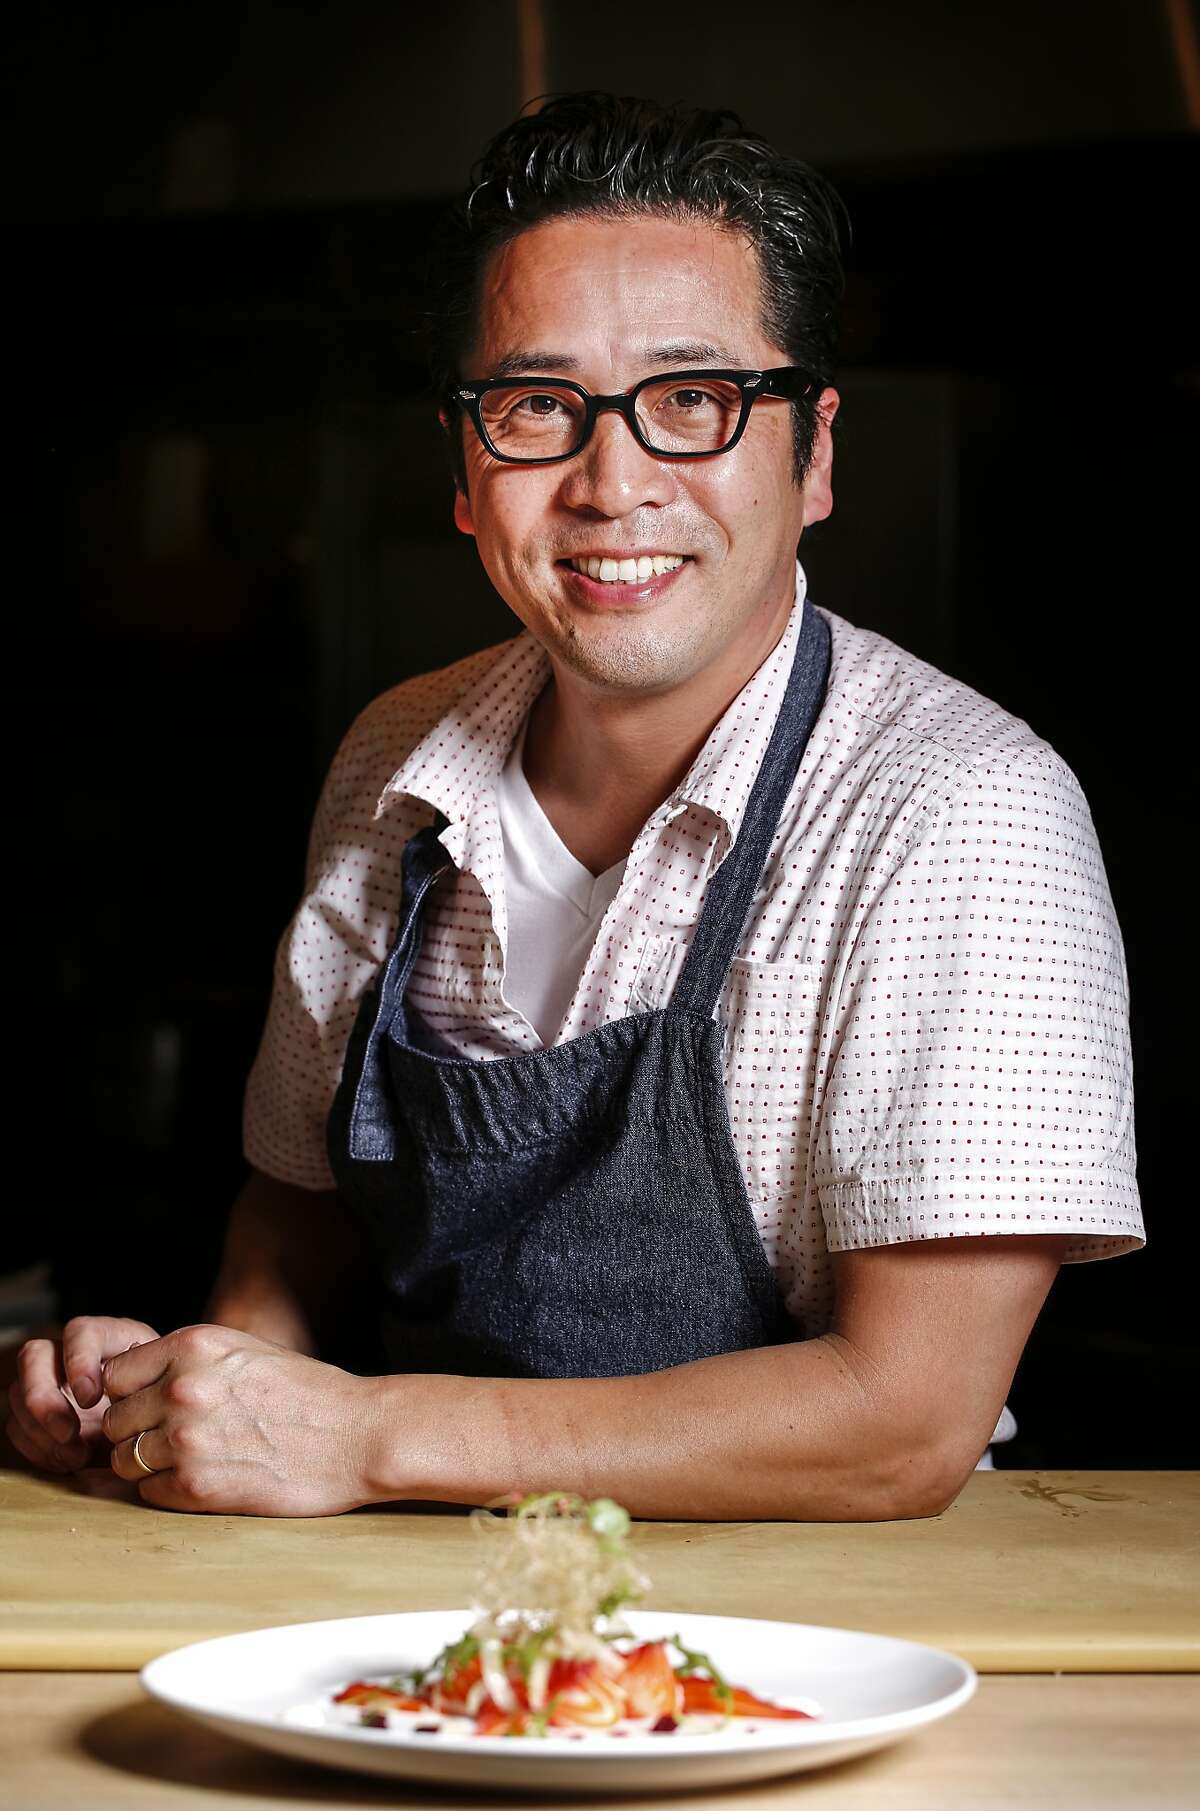 Sho Kamio of Iysasare is seen with his Beet Cured Ocean Trout with Yuzu Aioli on Thursday, July 17, 2014 in Berkeley, Calif.